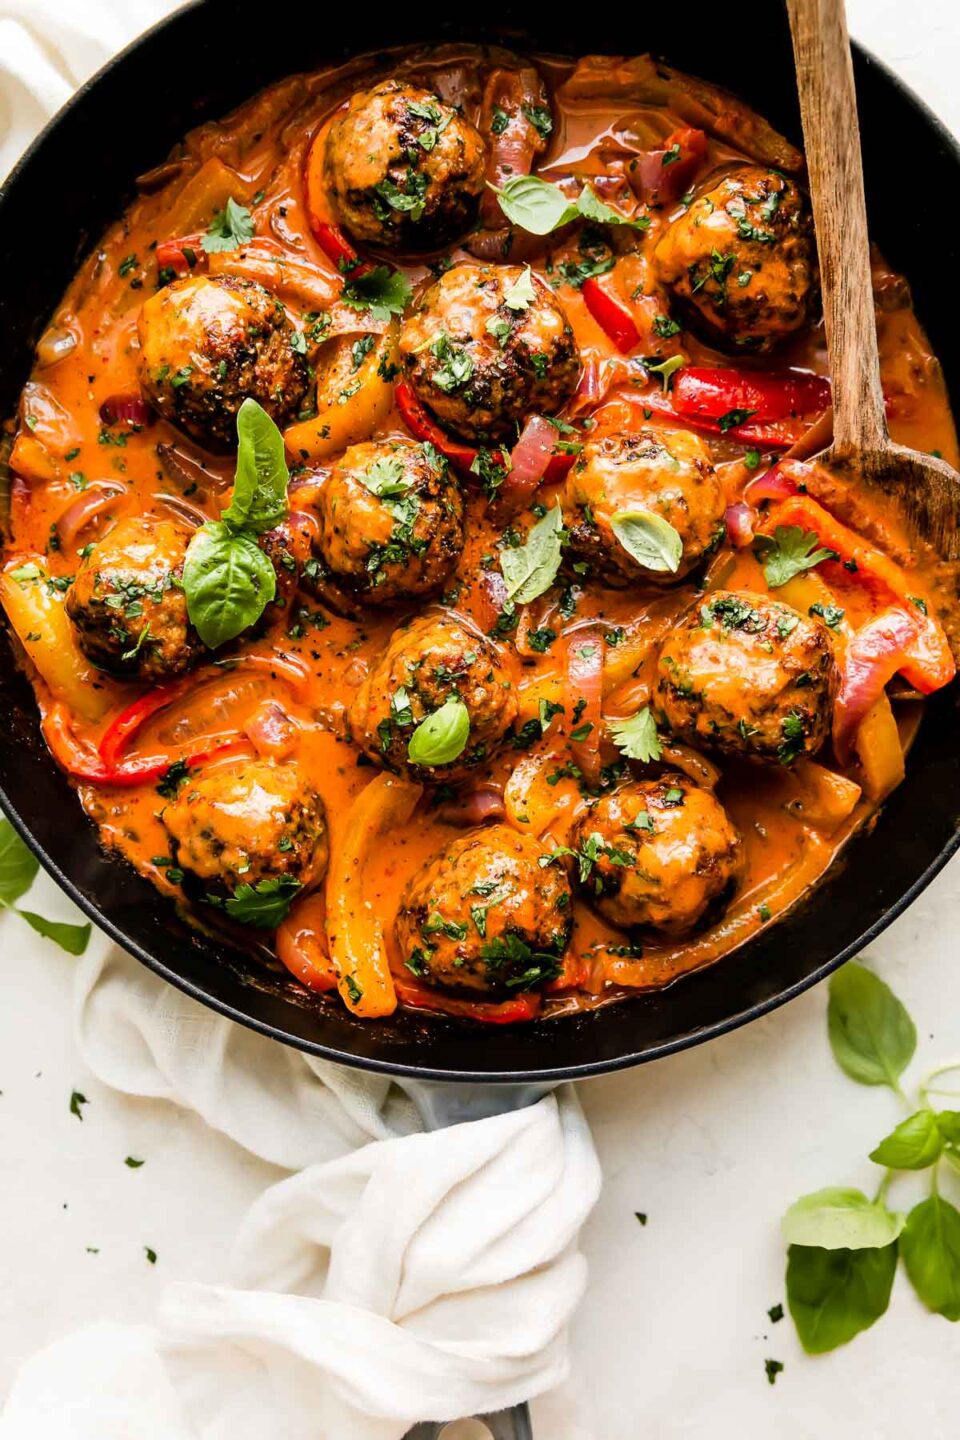 Curry turkey meatballs fill a large gray Staub cast iron skillet that sits atop a creamy white textured surface. The meatballs have been garnished with fresh basil and cilantro. A wooden serving spoon rests inside of the skillet and the skillet is surrounded by fresh basil leaves with a white linen napkin is tucked underneath the skillet and around the skillet's handle.